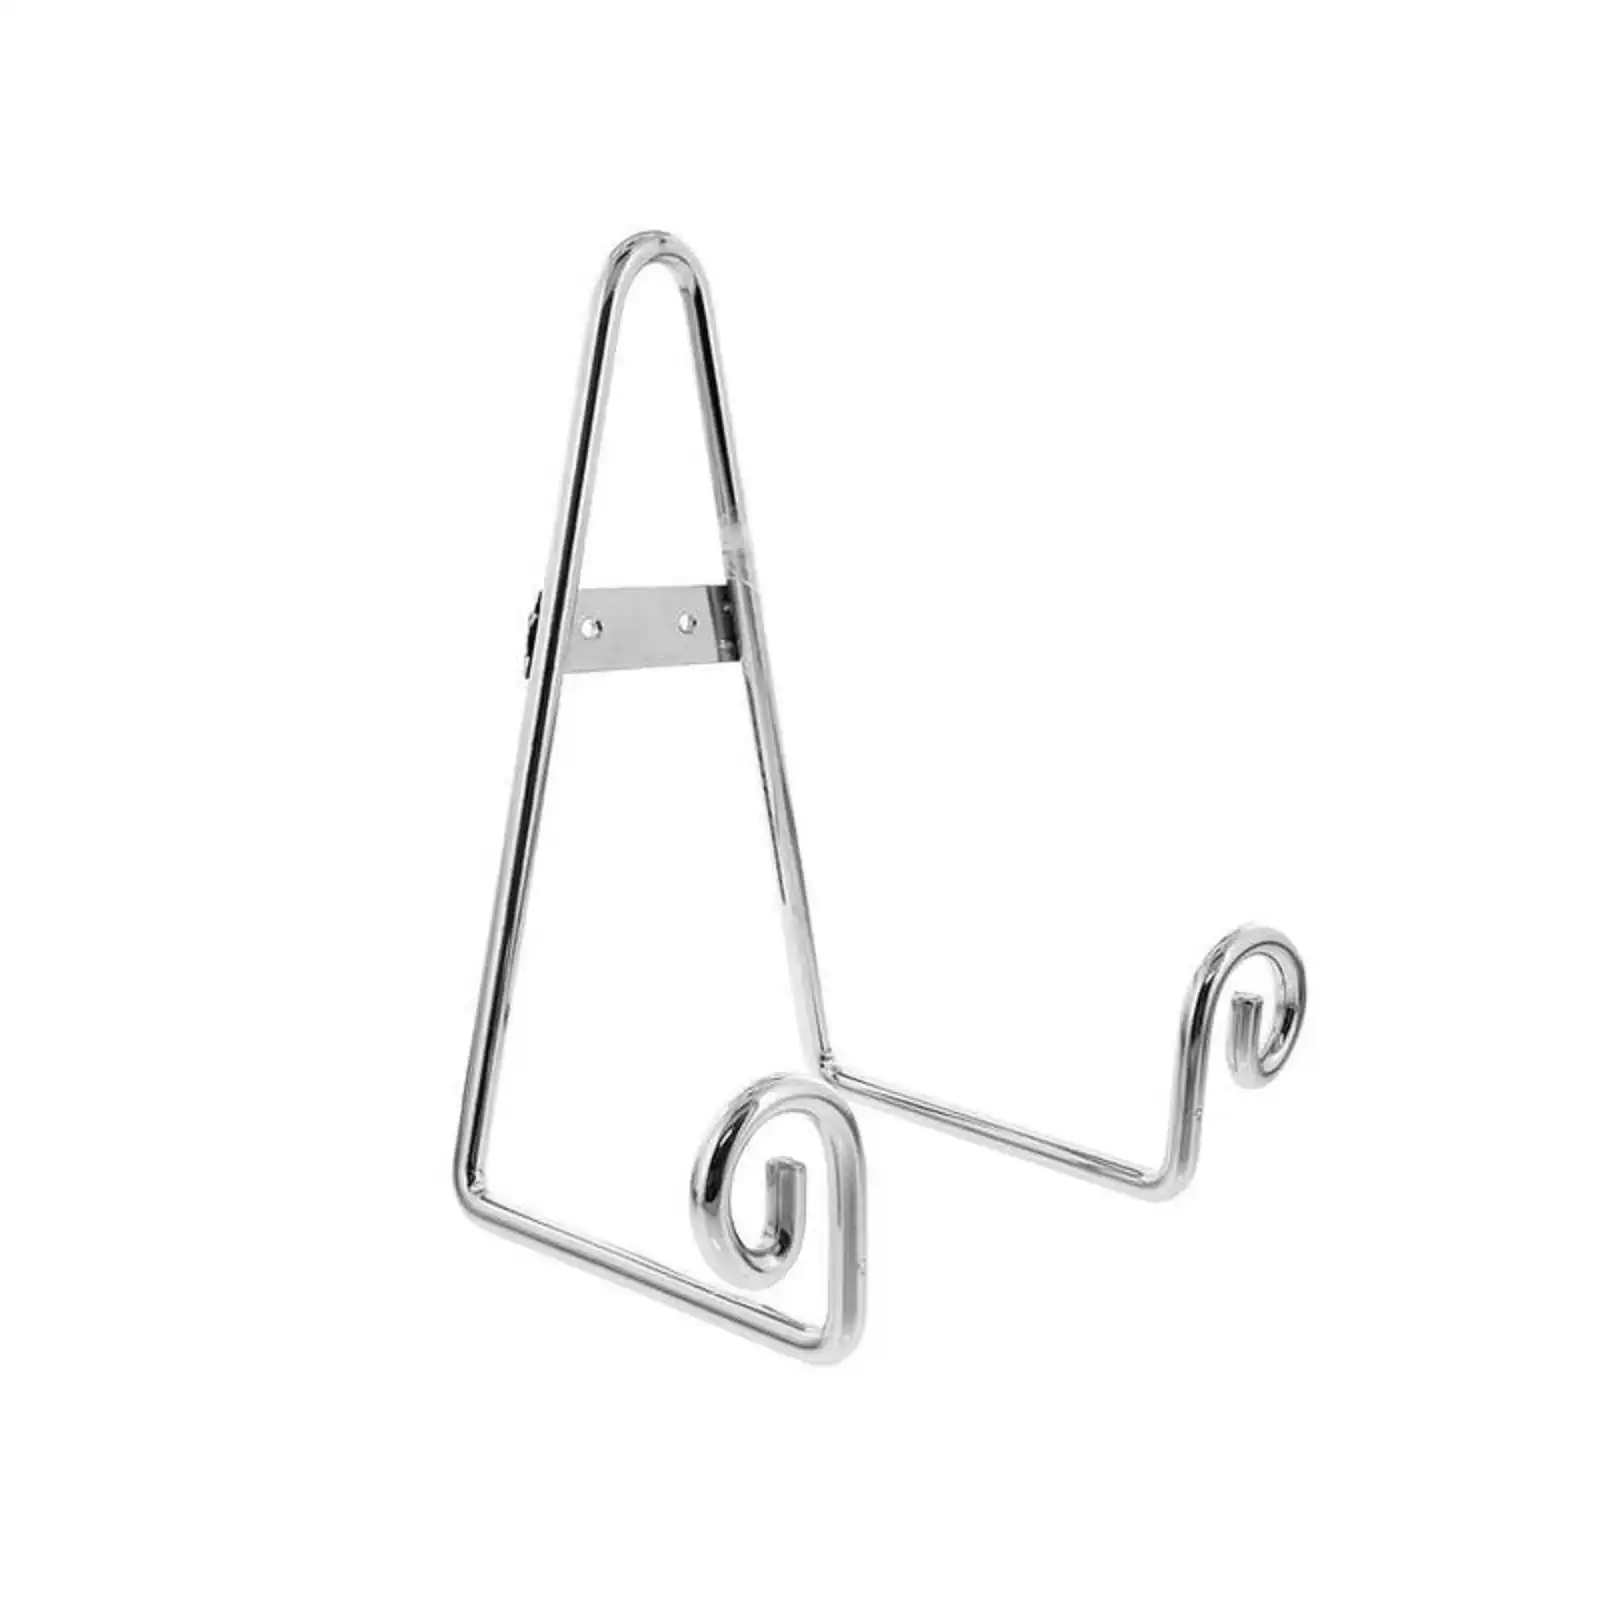 Entree Scroll Plate Stand   Chrome Large